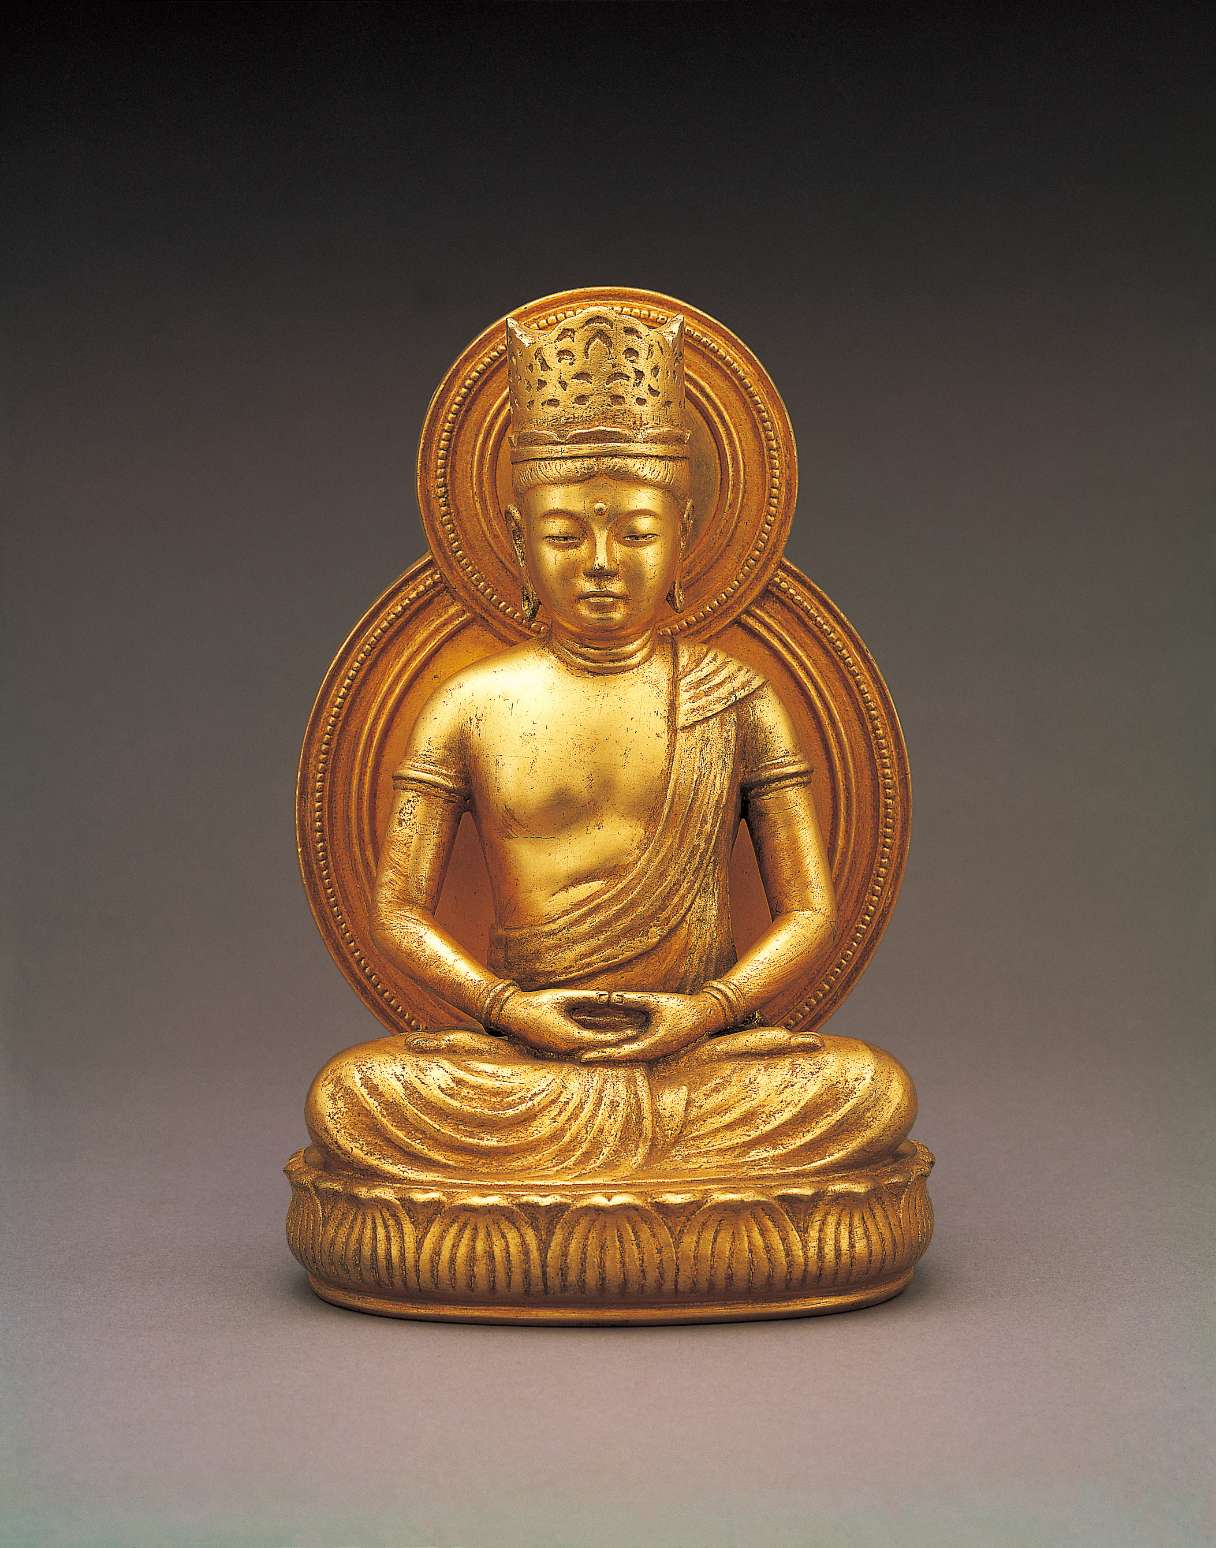 A lustrous golden hued statue of a buddha wearing a tall crown, sitting cross-legged atop a seat of curving lotus petals, hands in meditation, with a copper hued nimbus behind his body and head.